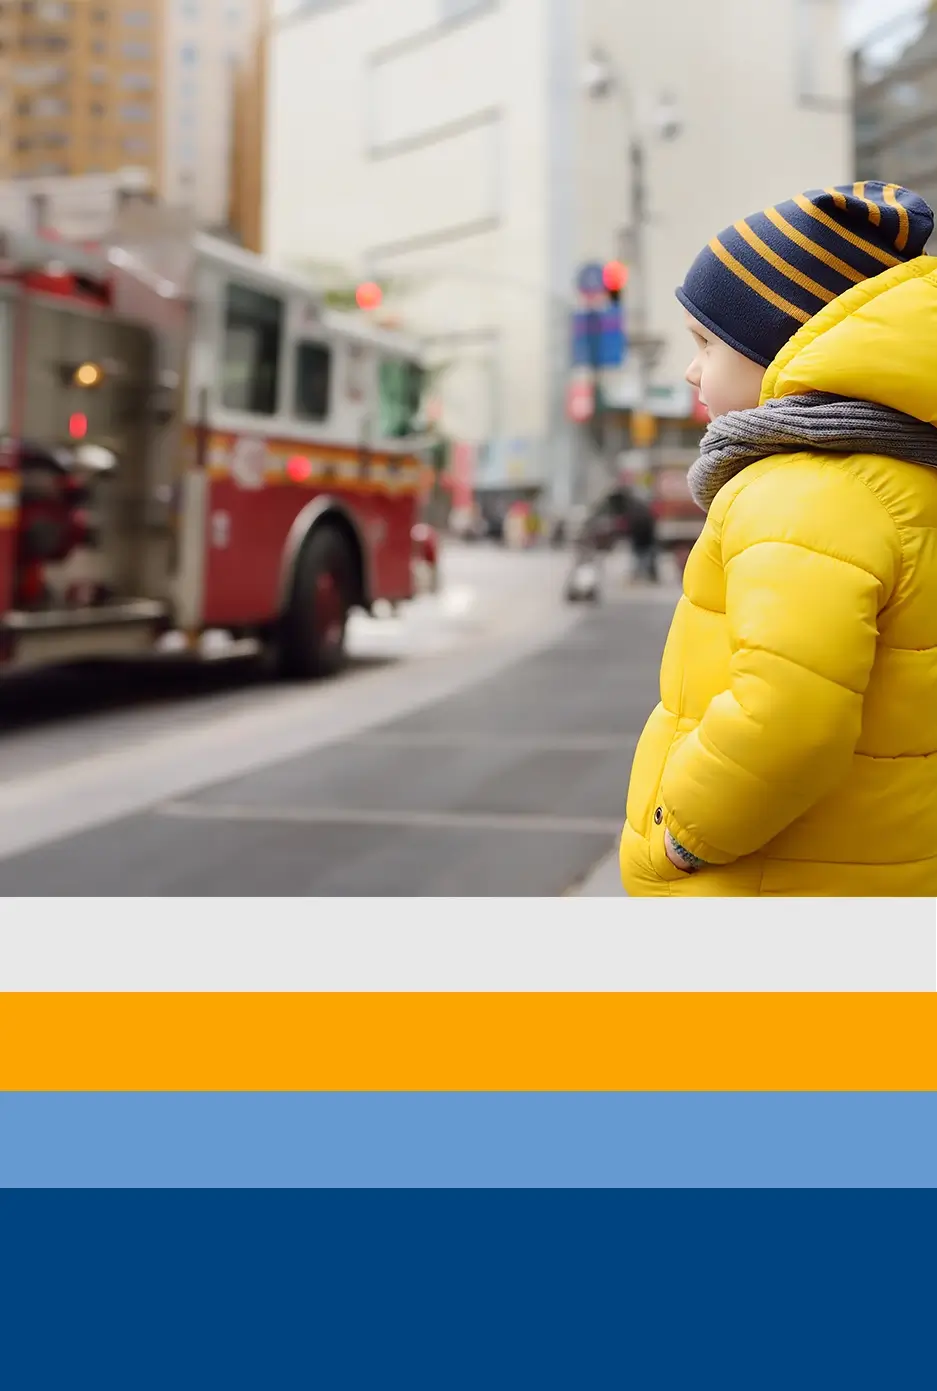 Child wearing a yellow jacket stands on the street, gazing in admiration as a fire truck passes by. This scene illustrates how BTC collaborates with families of first responders, aiming to enhance the mental well-being of all involved